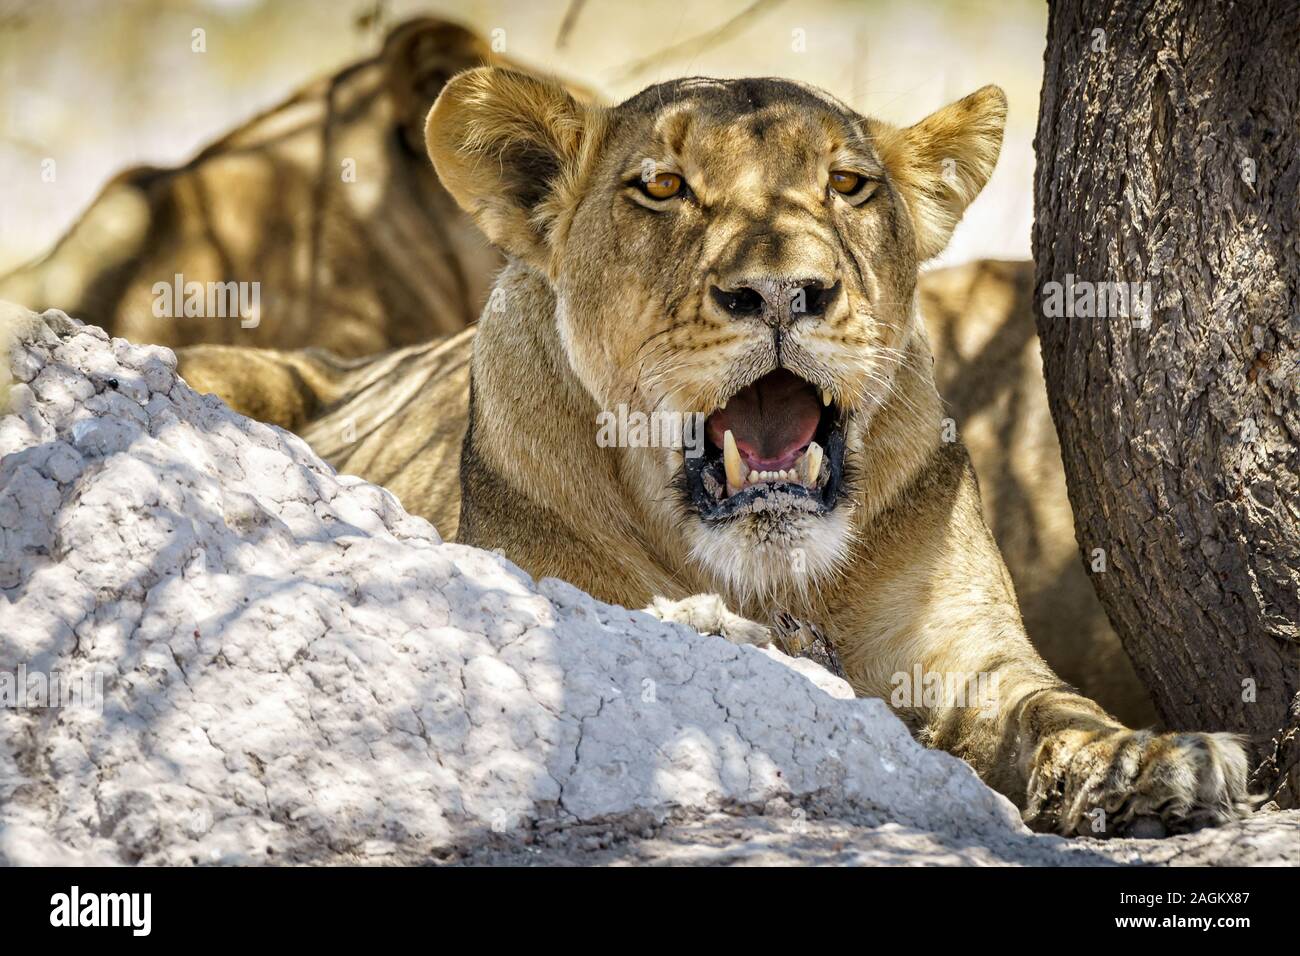 Lioness with broken tooth Stock Photo